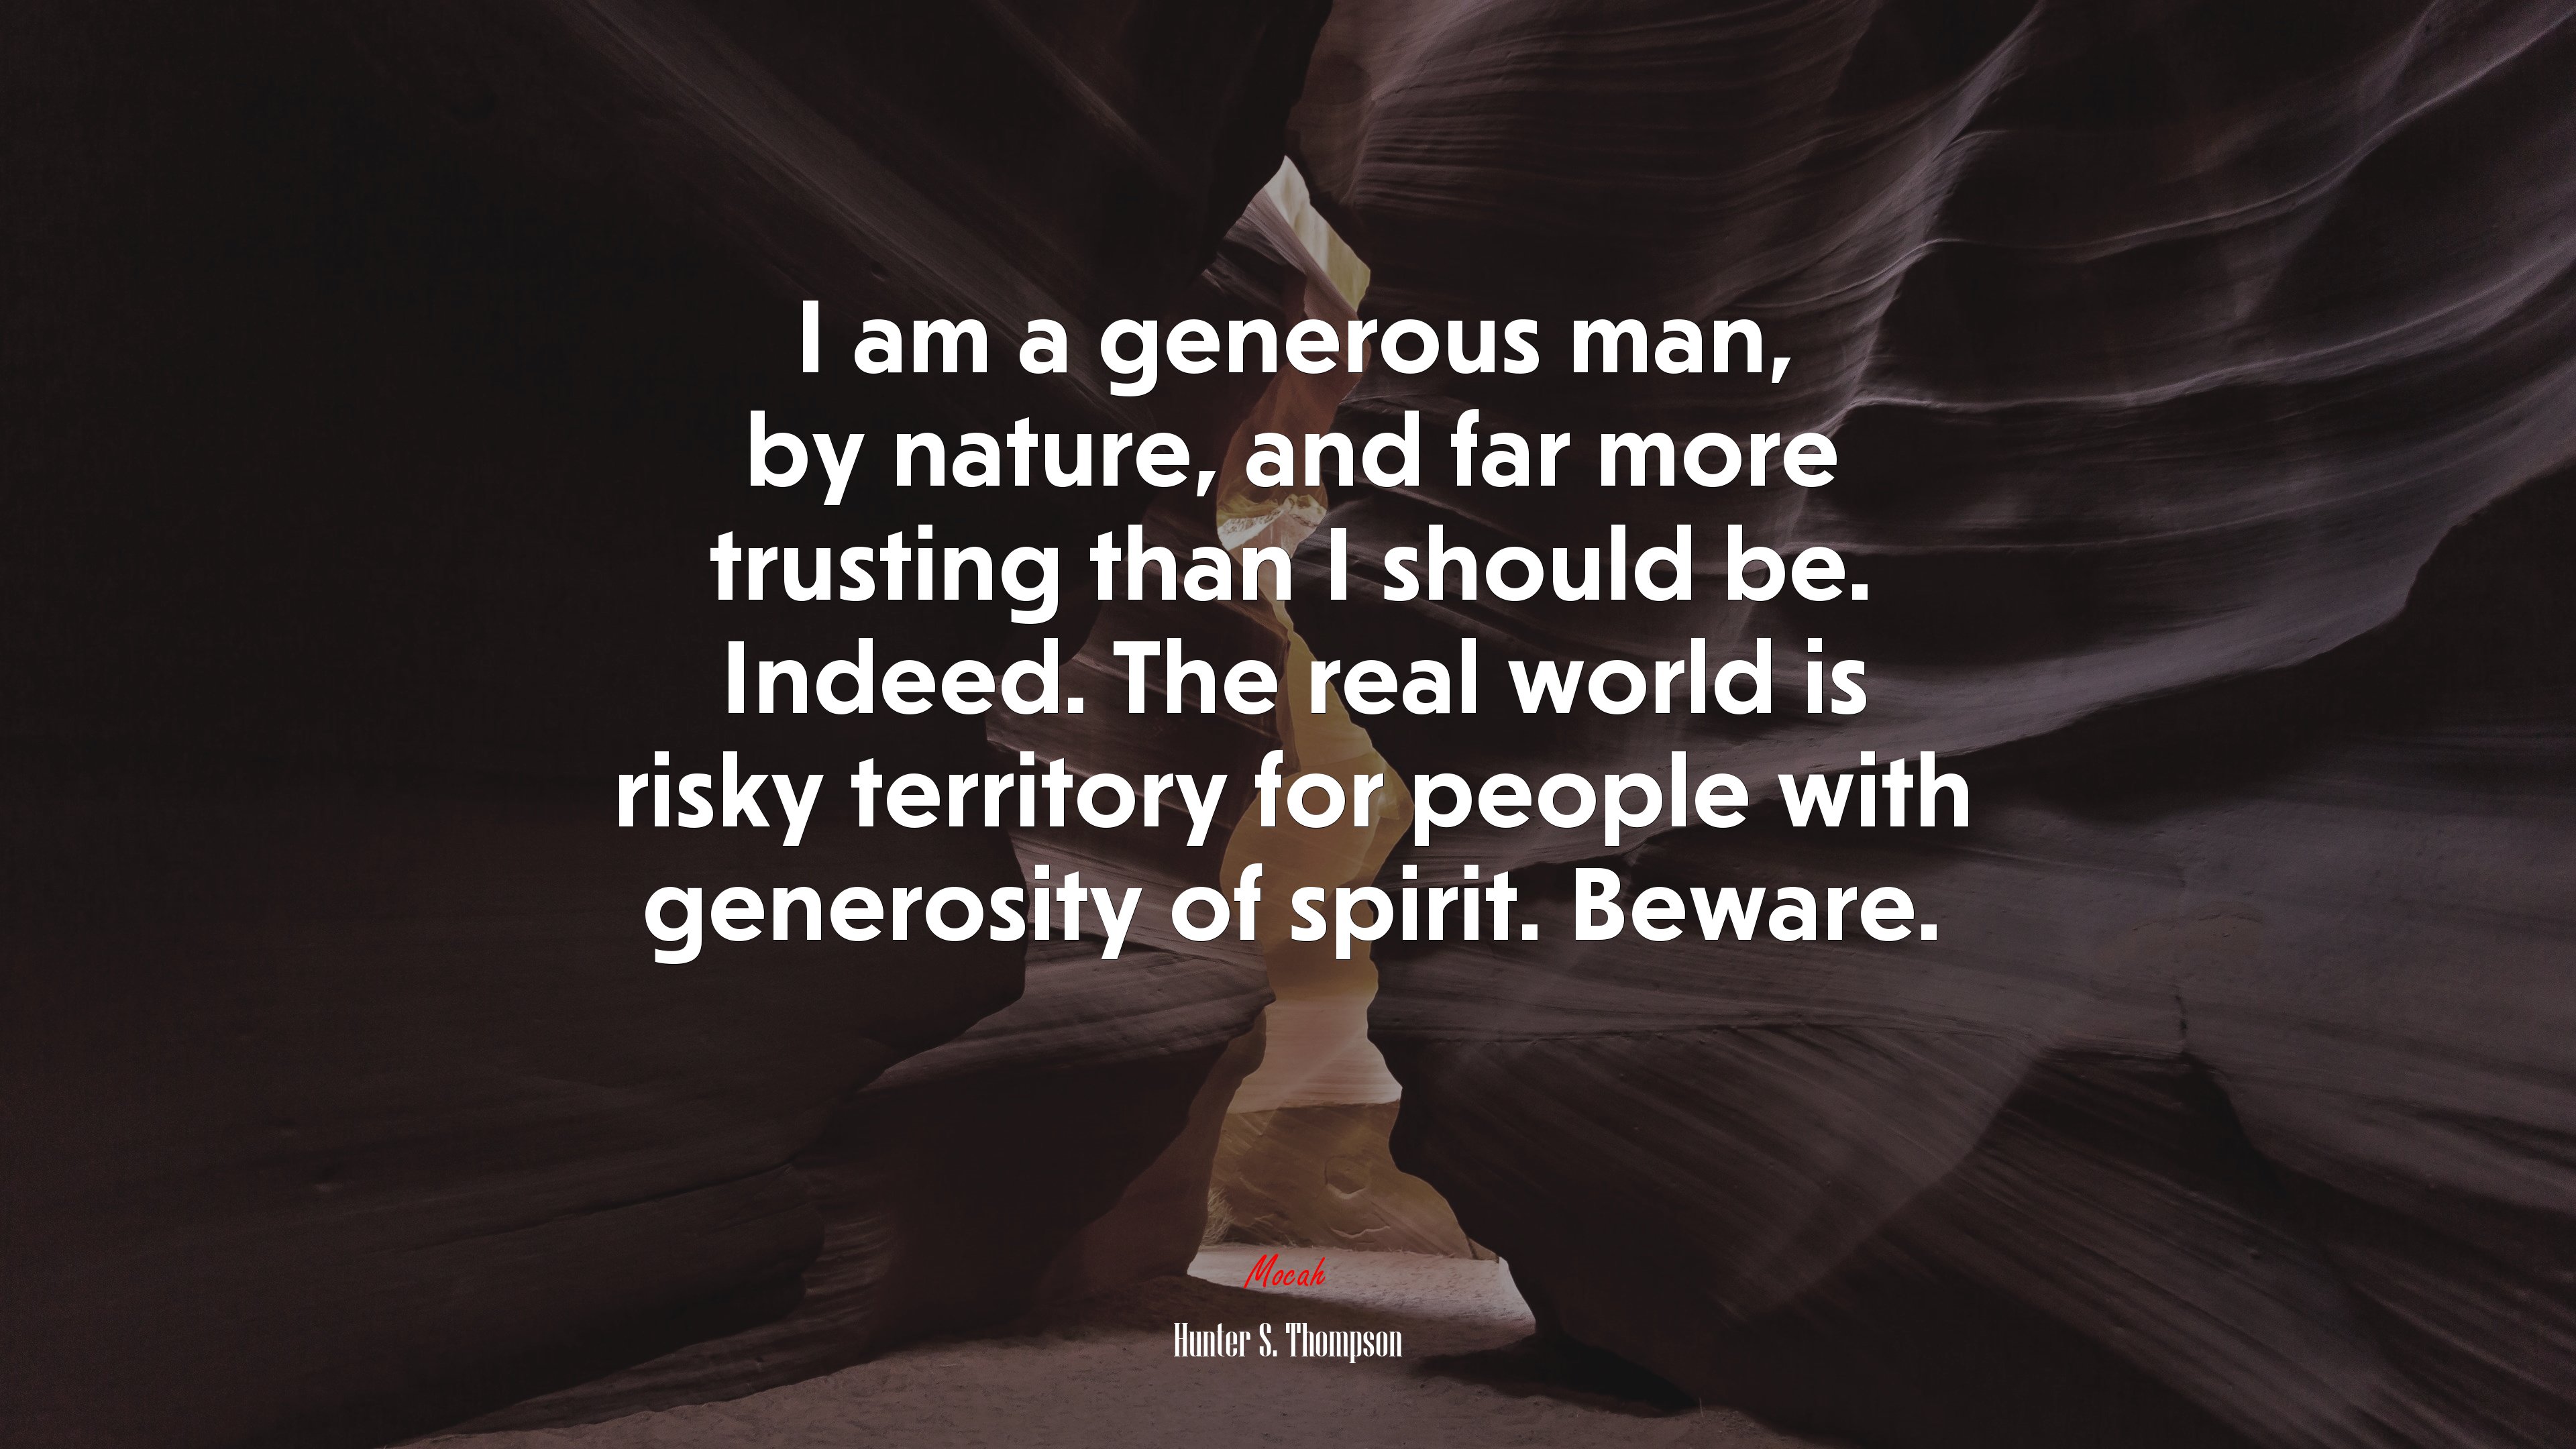 I am a generous man, by nature, and far more trusting than I should be. Indeed. The real world is risky territory for people with generosity of spirit. Beware